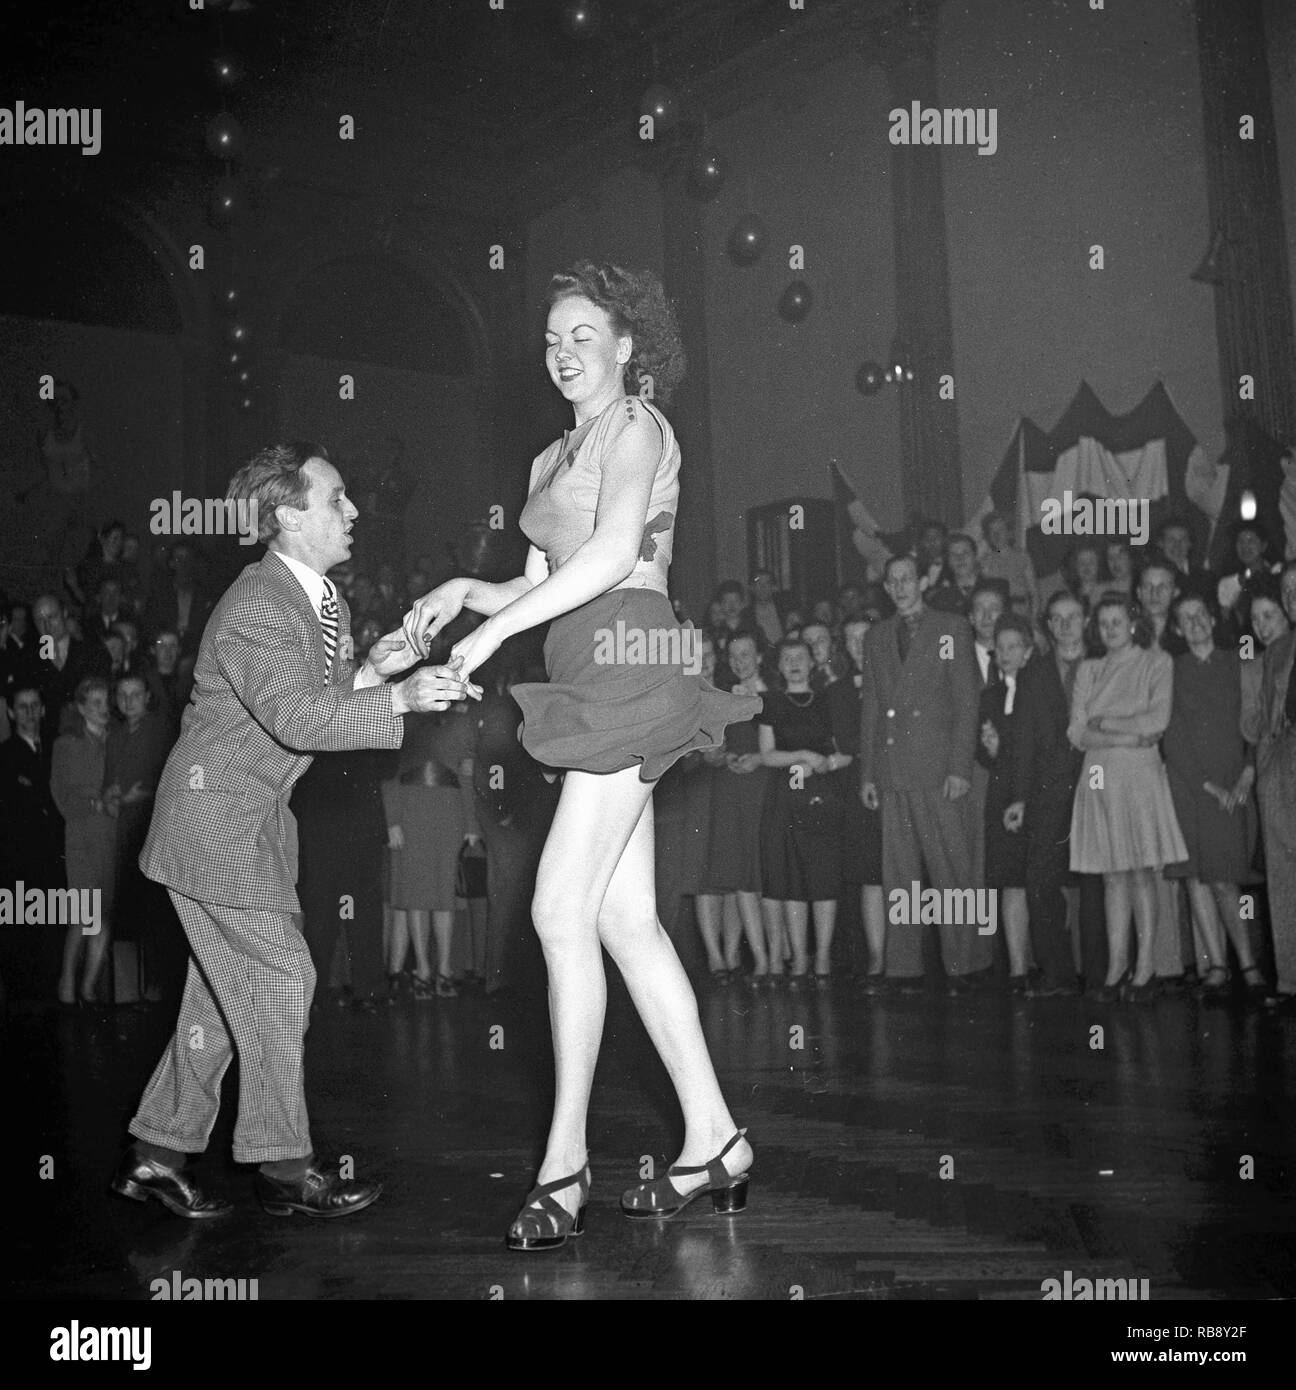 Jitterbug dance. A dance popularized in the United states and spread by American soldiers and sailors around the world during the Second world war. Pictured here a young couple when dancing the Jitterbug dance 1948 during a competition dance event. Photo: Kristoffersson ref AH22-3 Stock Photo